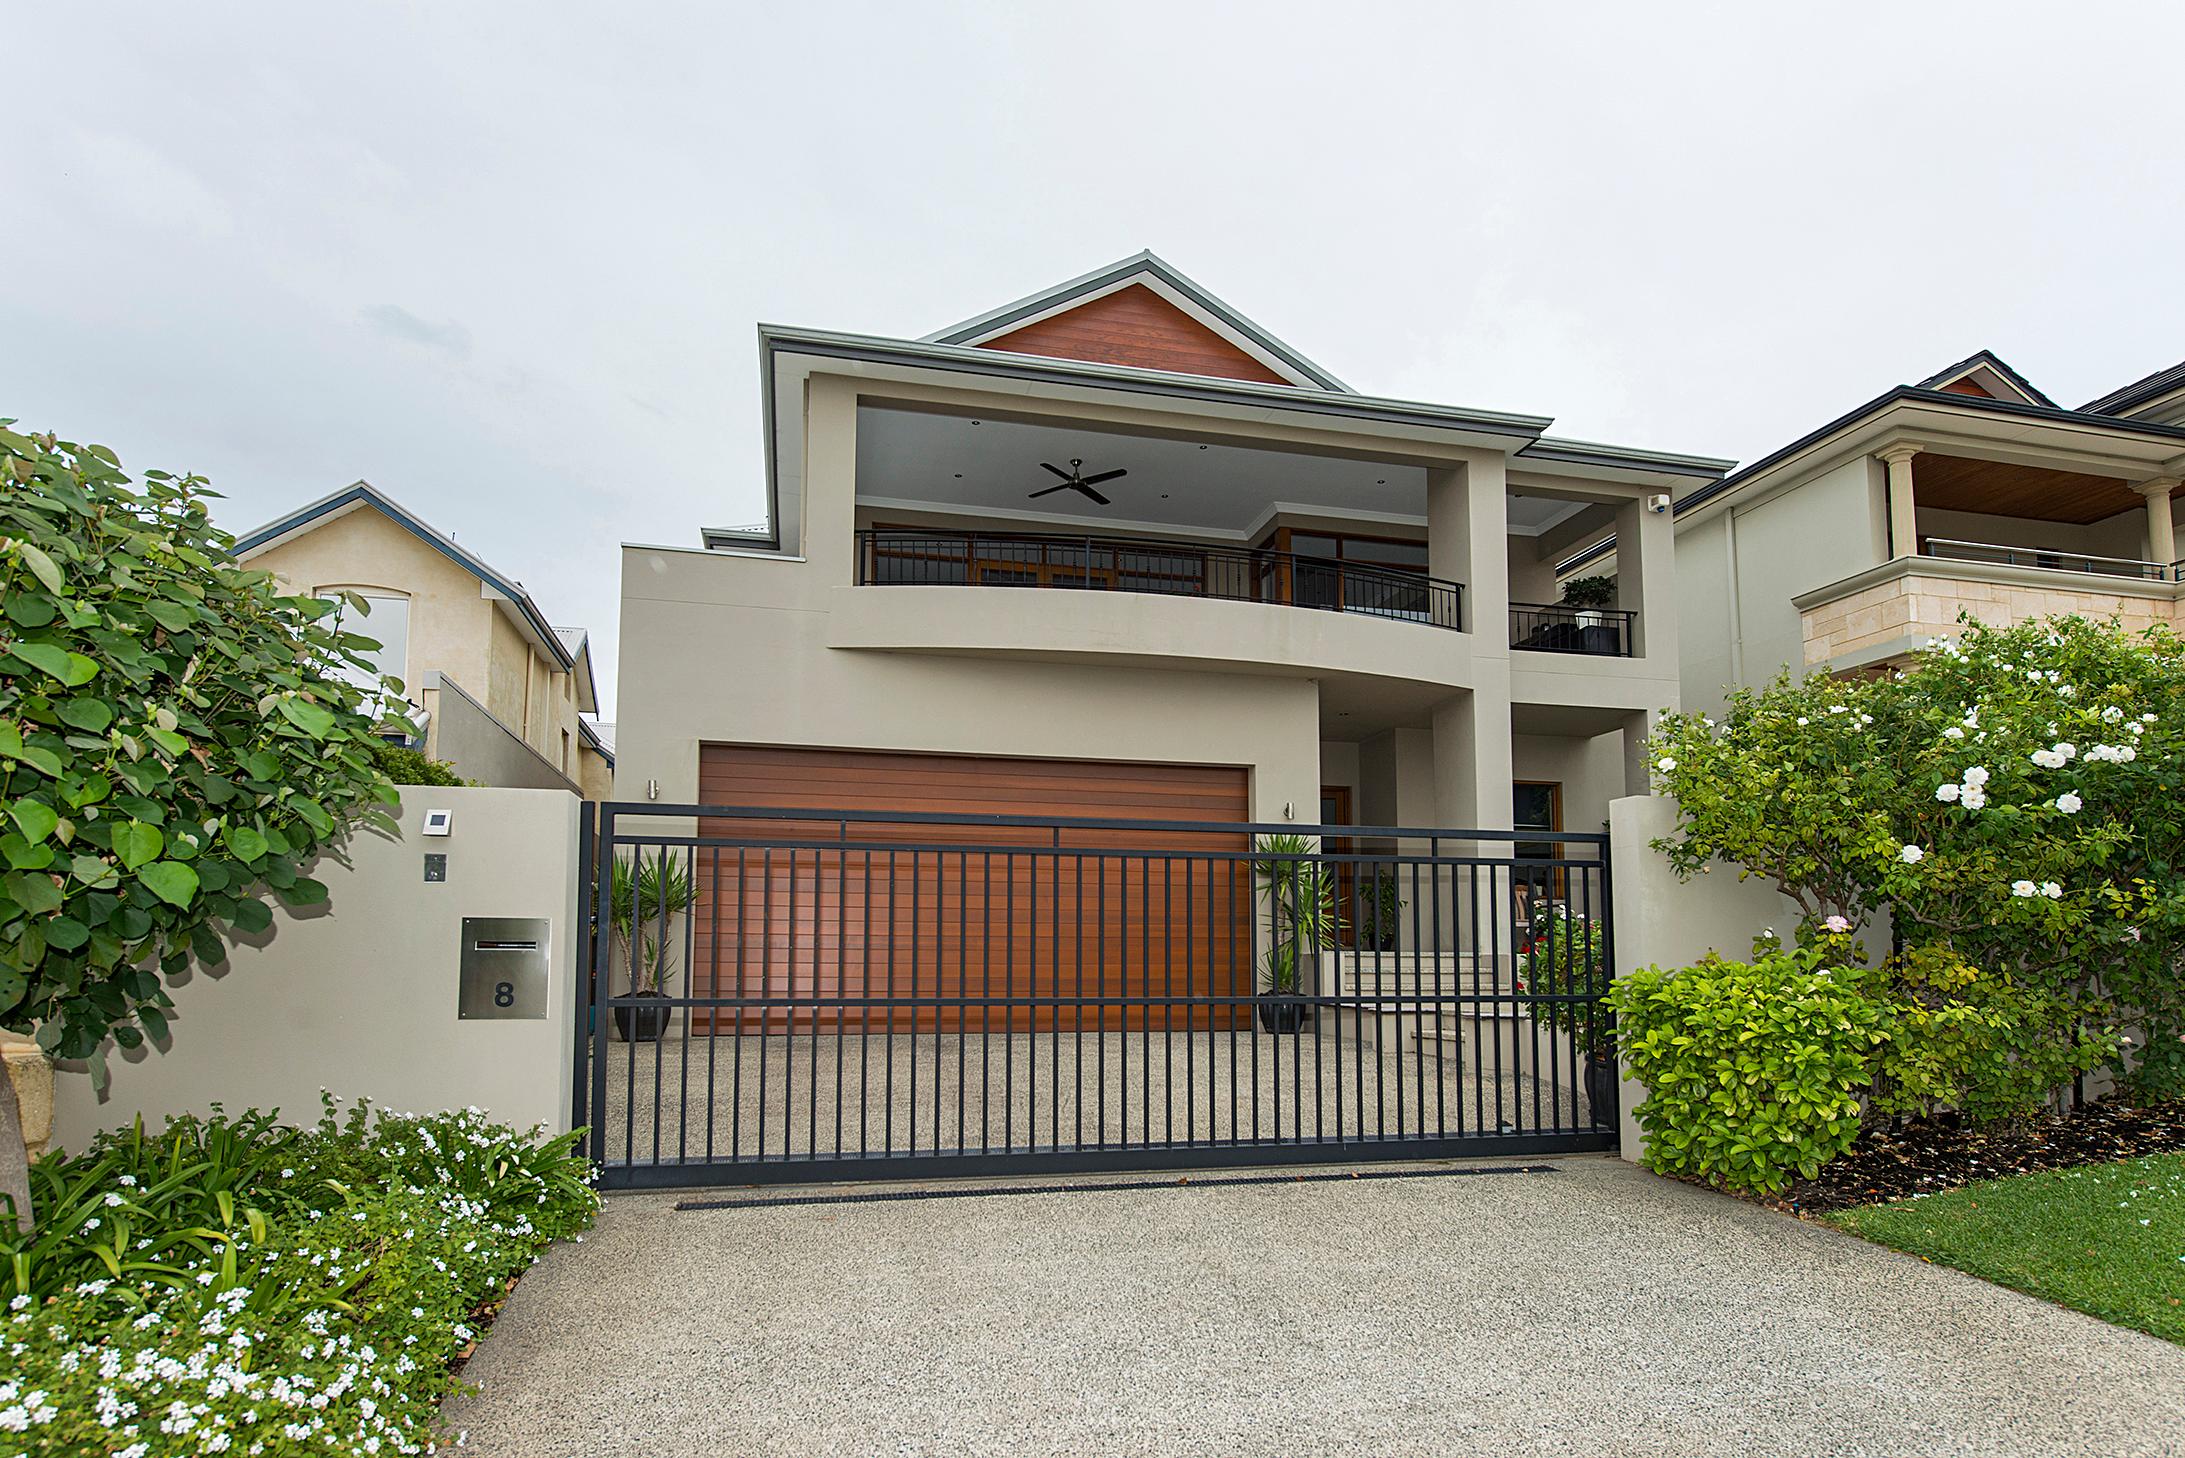 Property Image 1 - 8 Simply Stunning Swanbourne Family Home